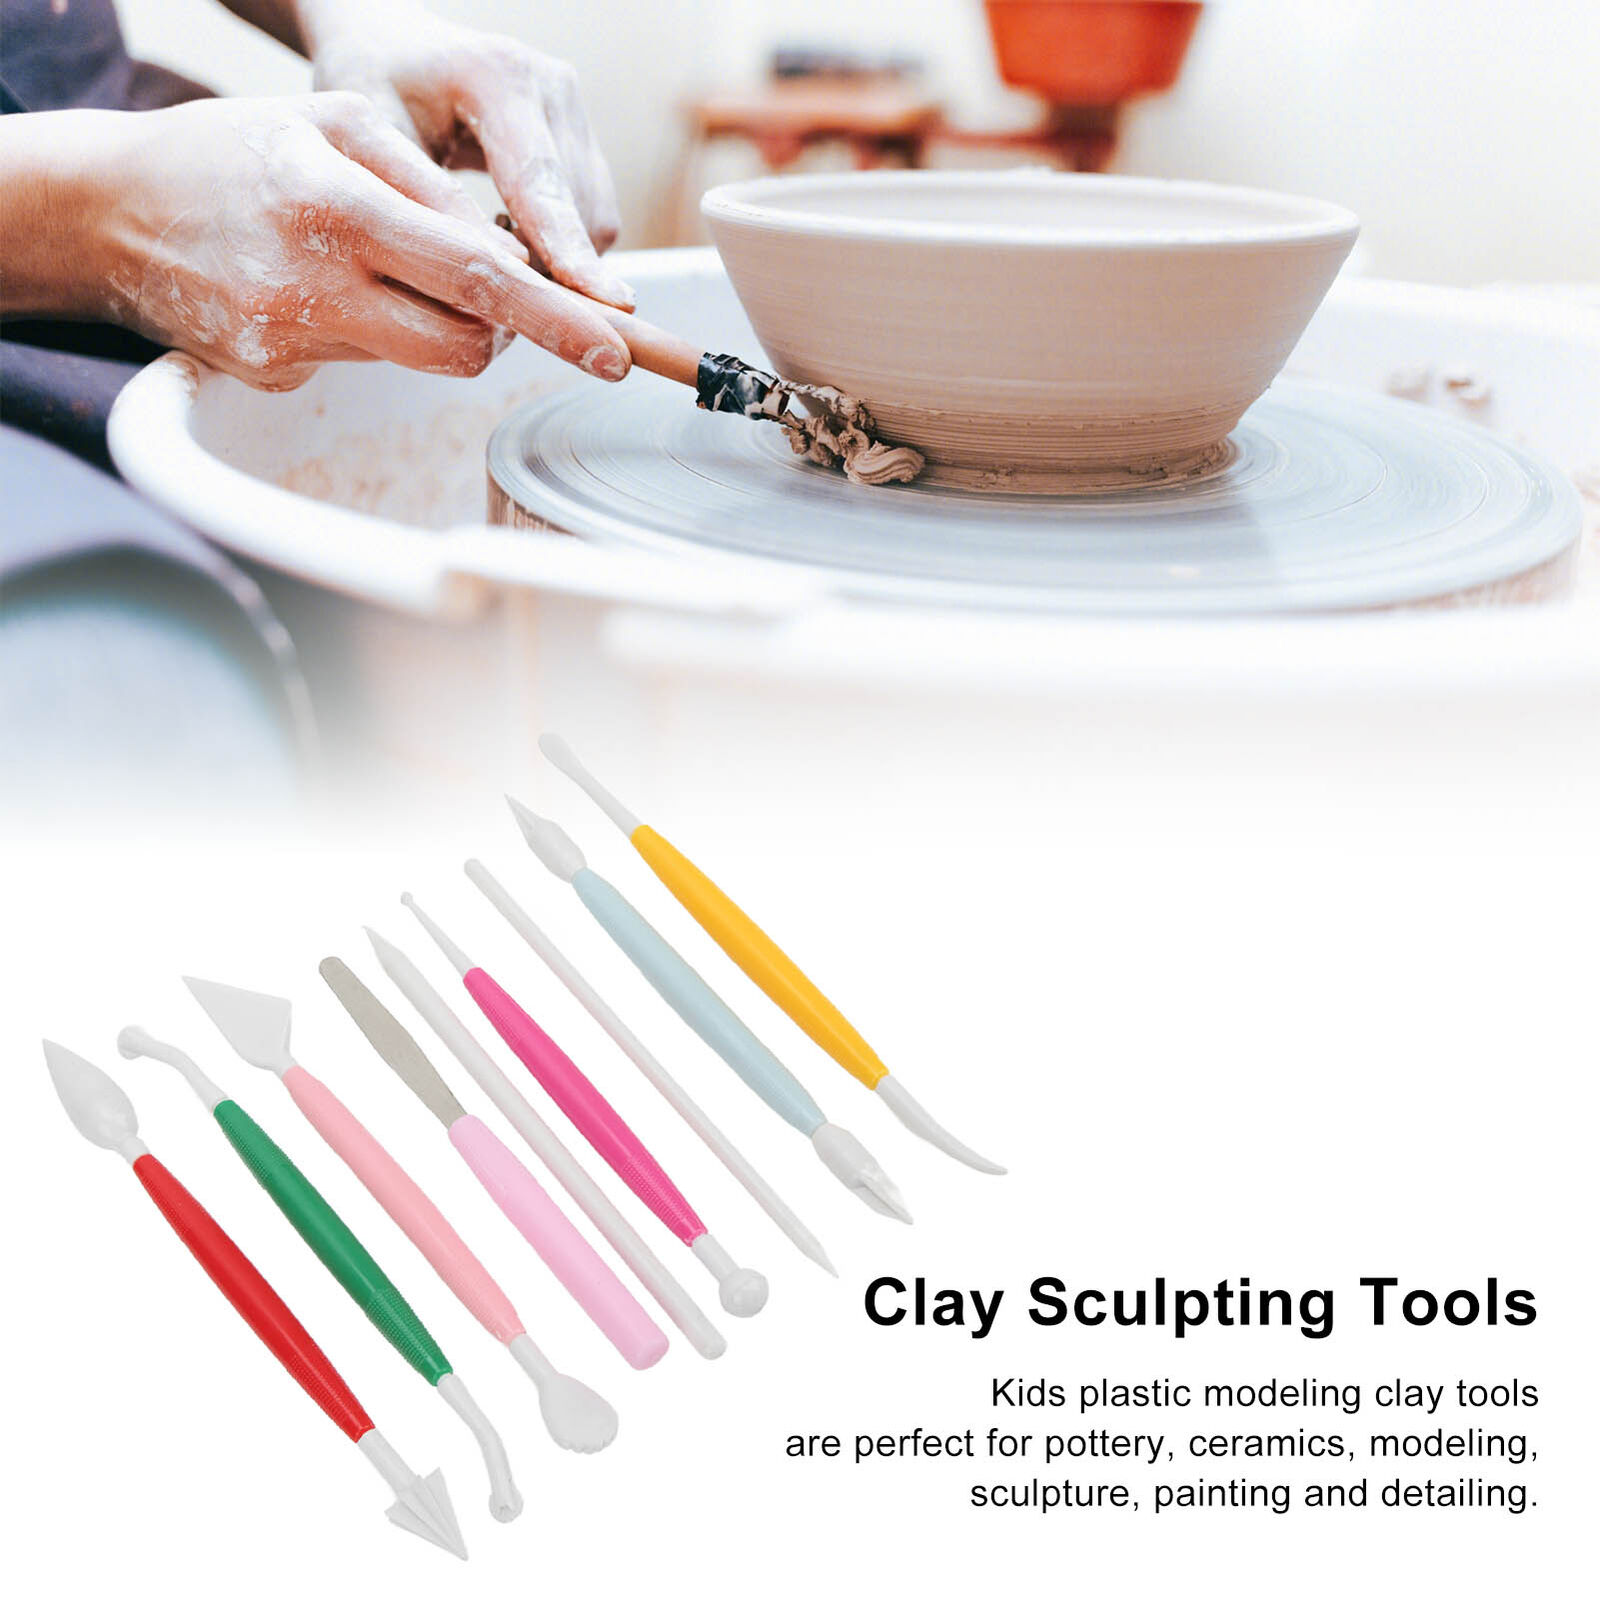 Kids Plastic Modeling Clay Tools Smoother Edges Pottery Clay